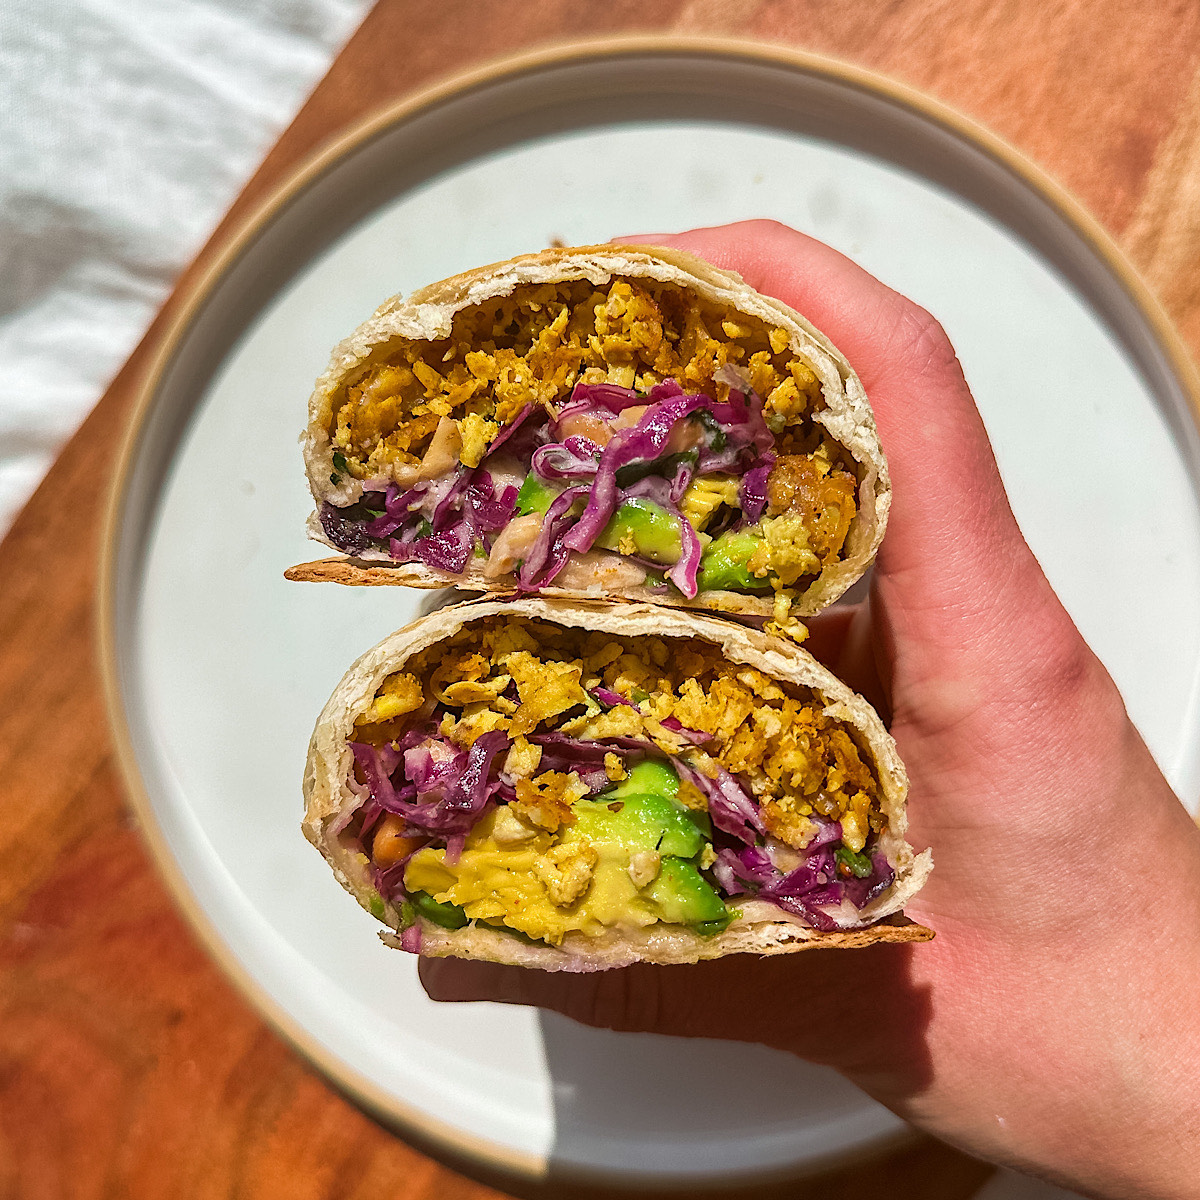 curried shredded tofu burrito with cabbage slaw